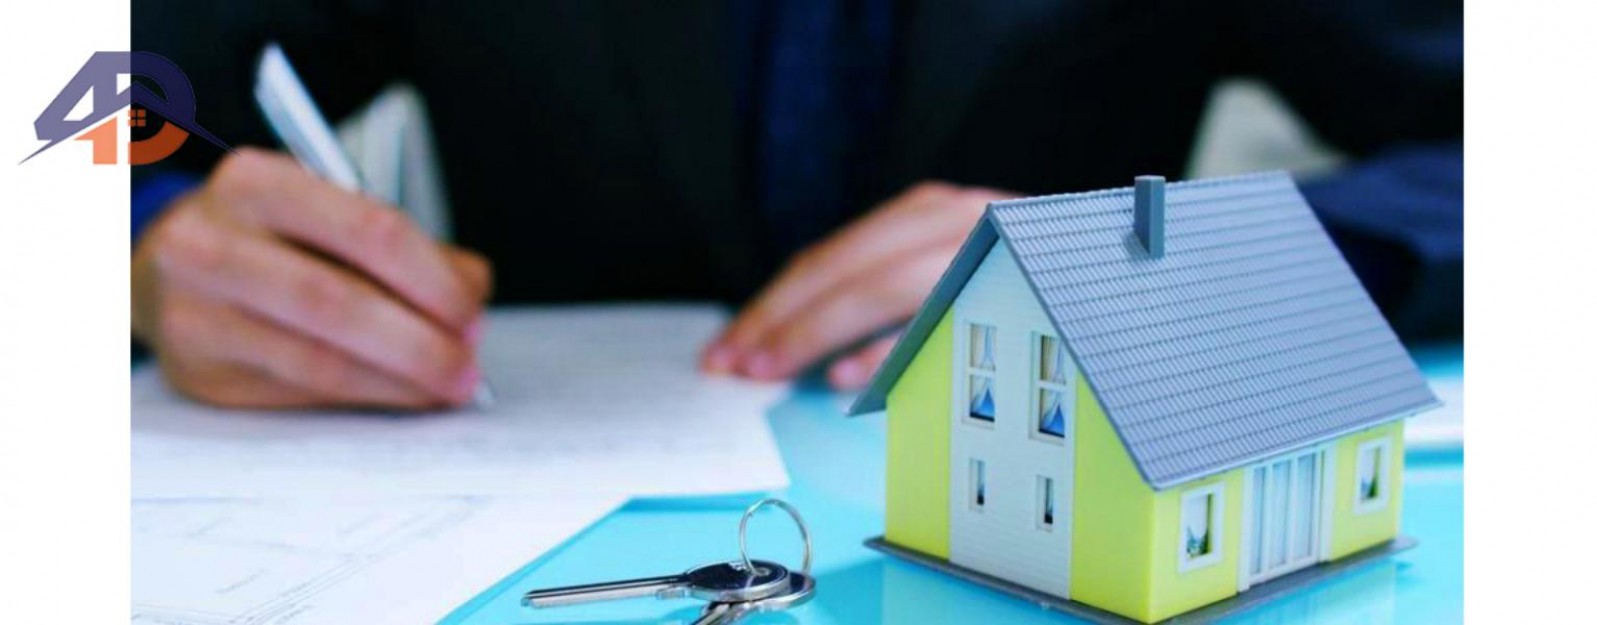 Complete Guide for Property Registration in Pakistan 2021-22